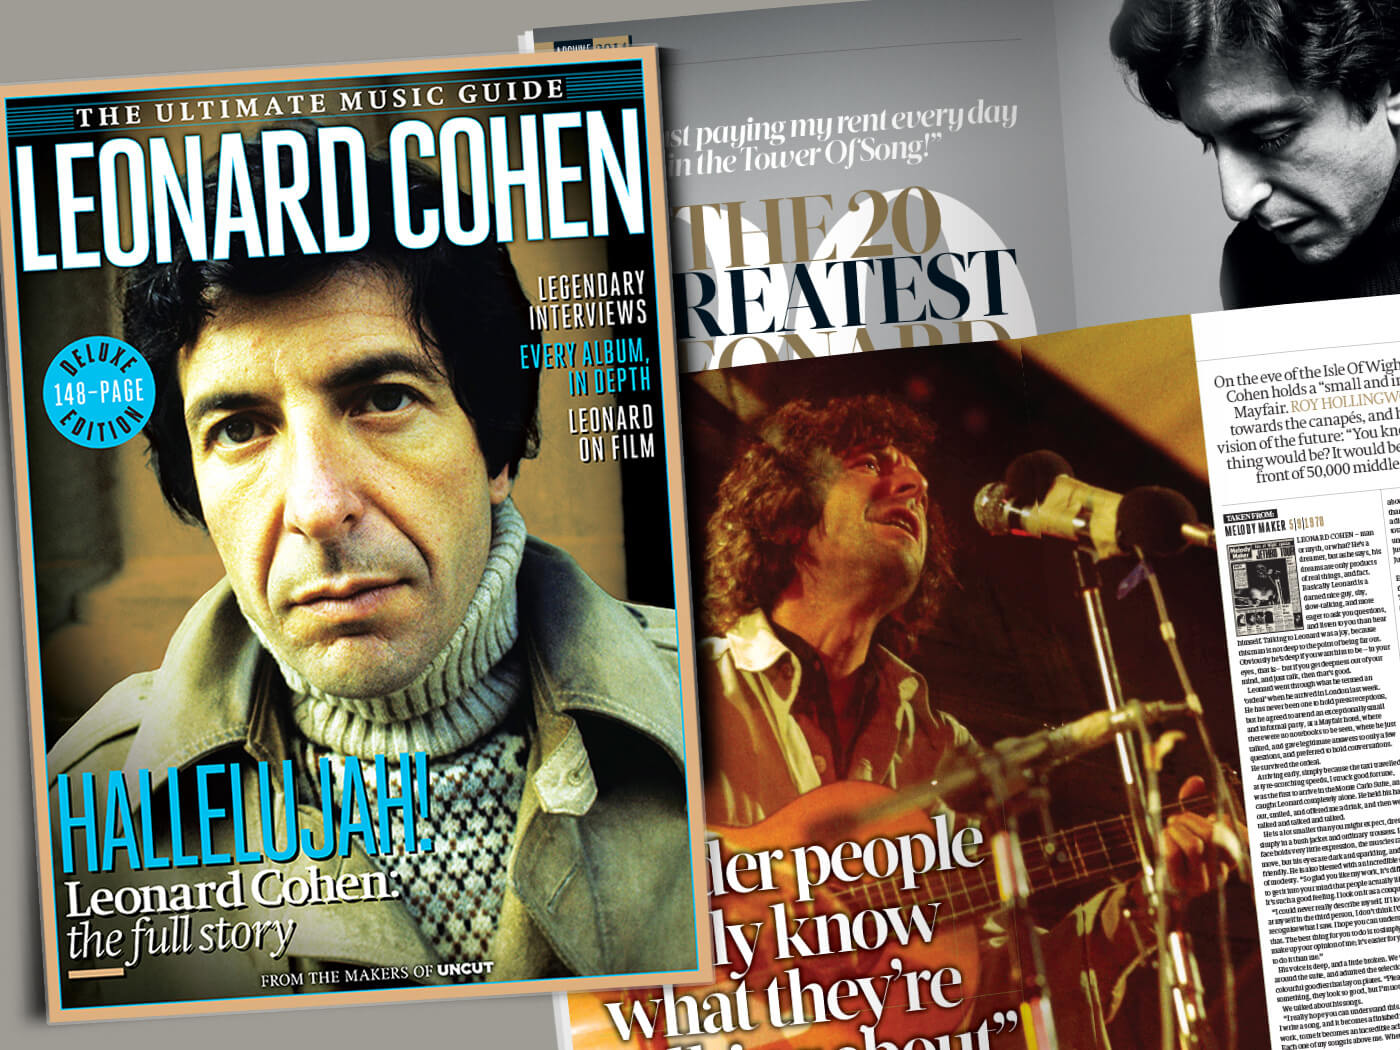 Introducing the Deluxe Ultimate Music Guide to Leonard Cohen